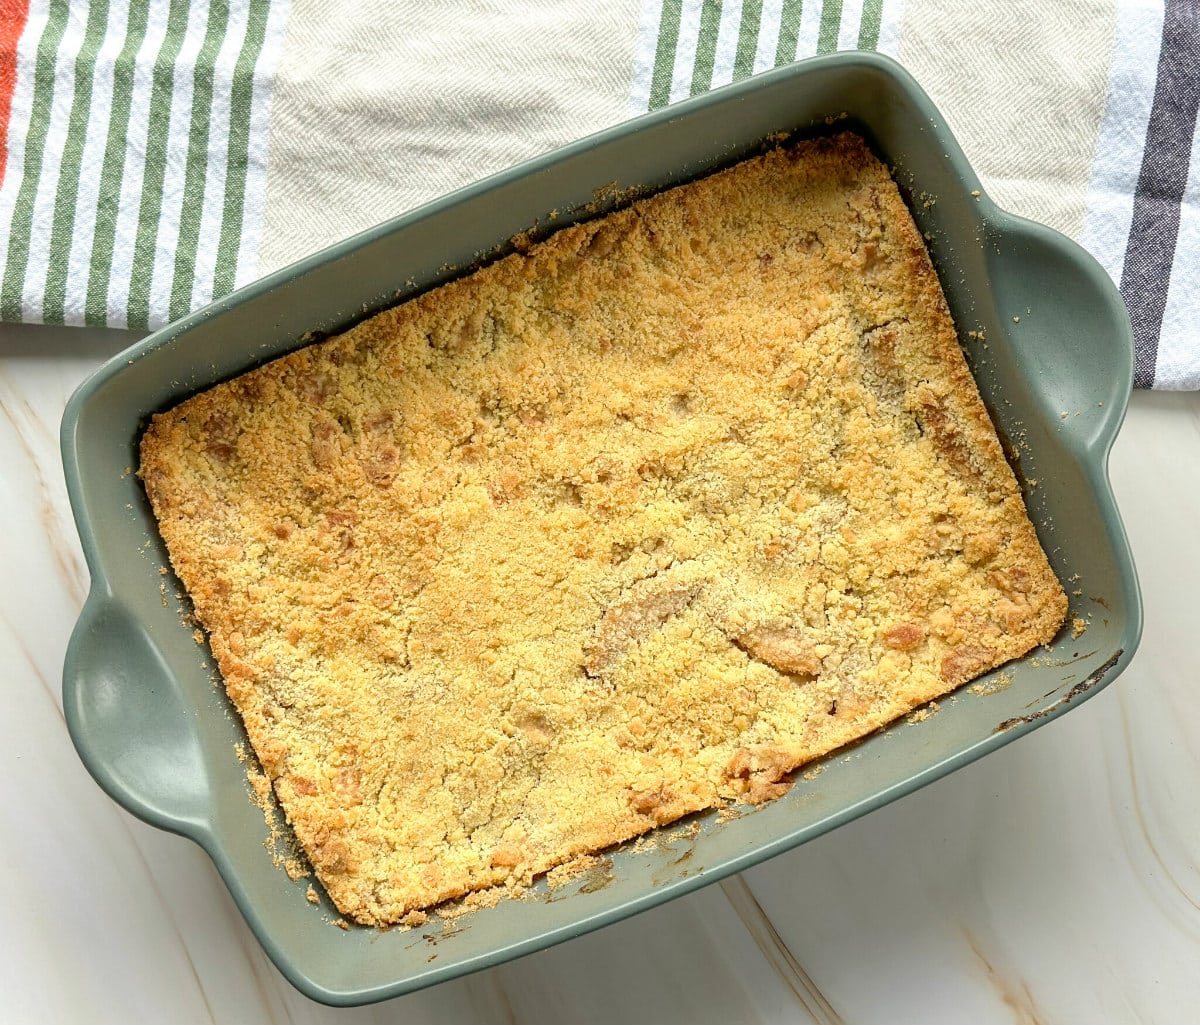 Golden brown apple crumble baked in a green dish